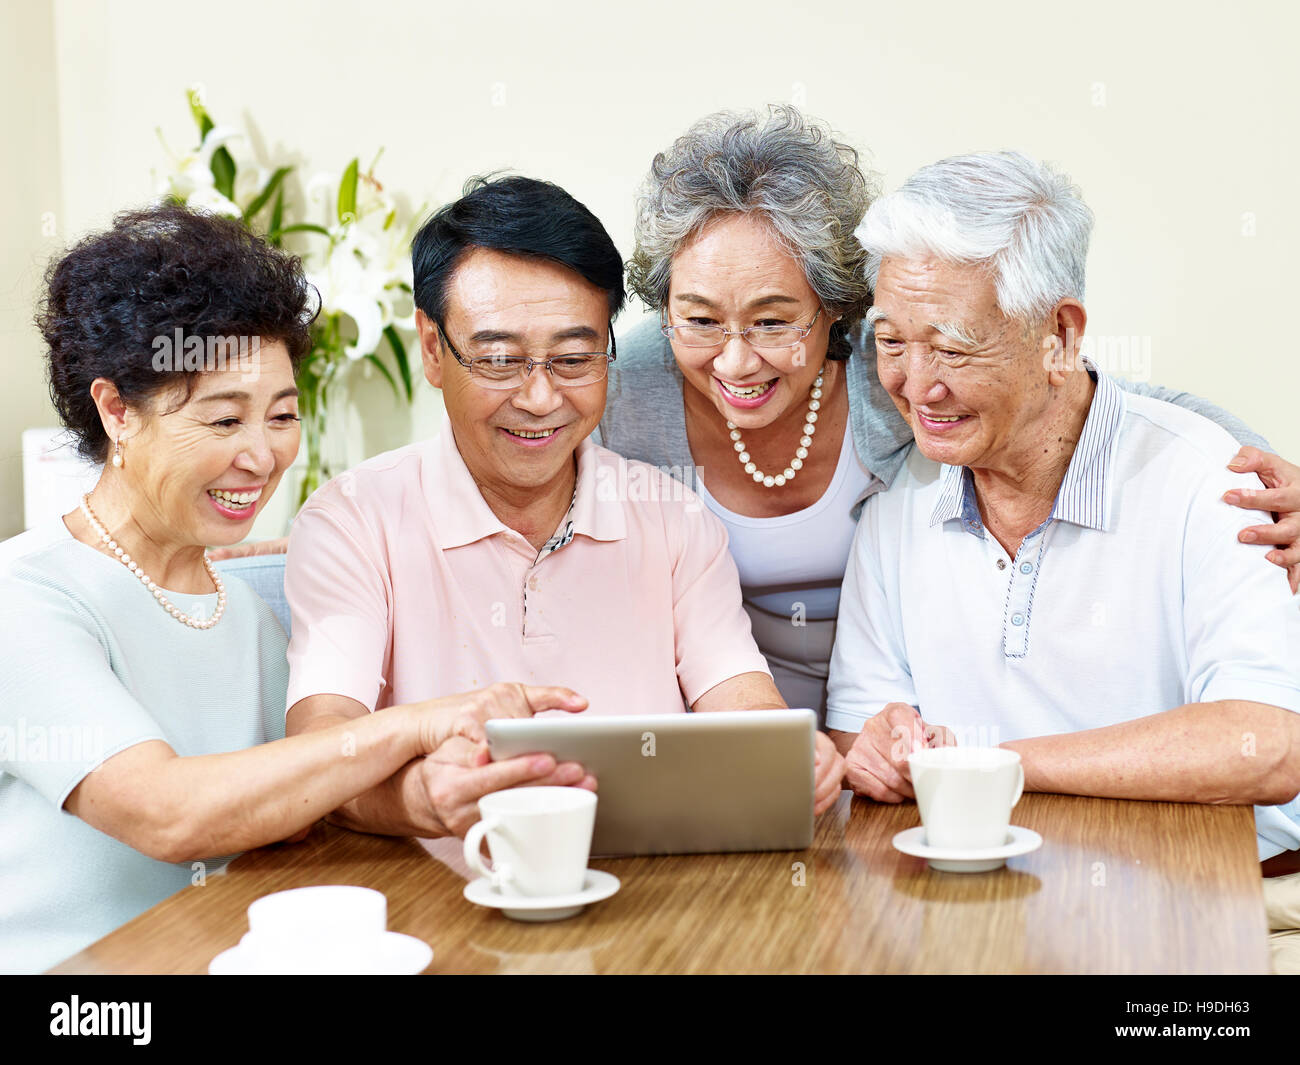 two senior asian couple looking at tablet computer, happy and smiling Stock Photo